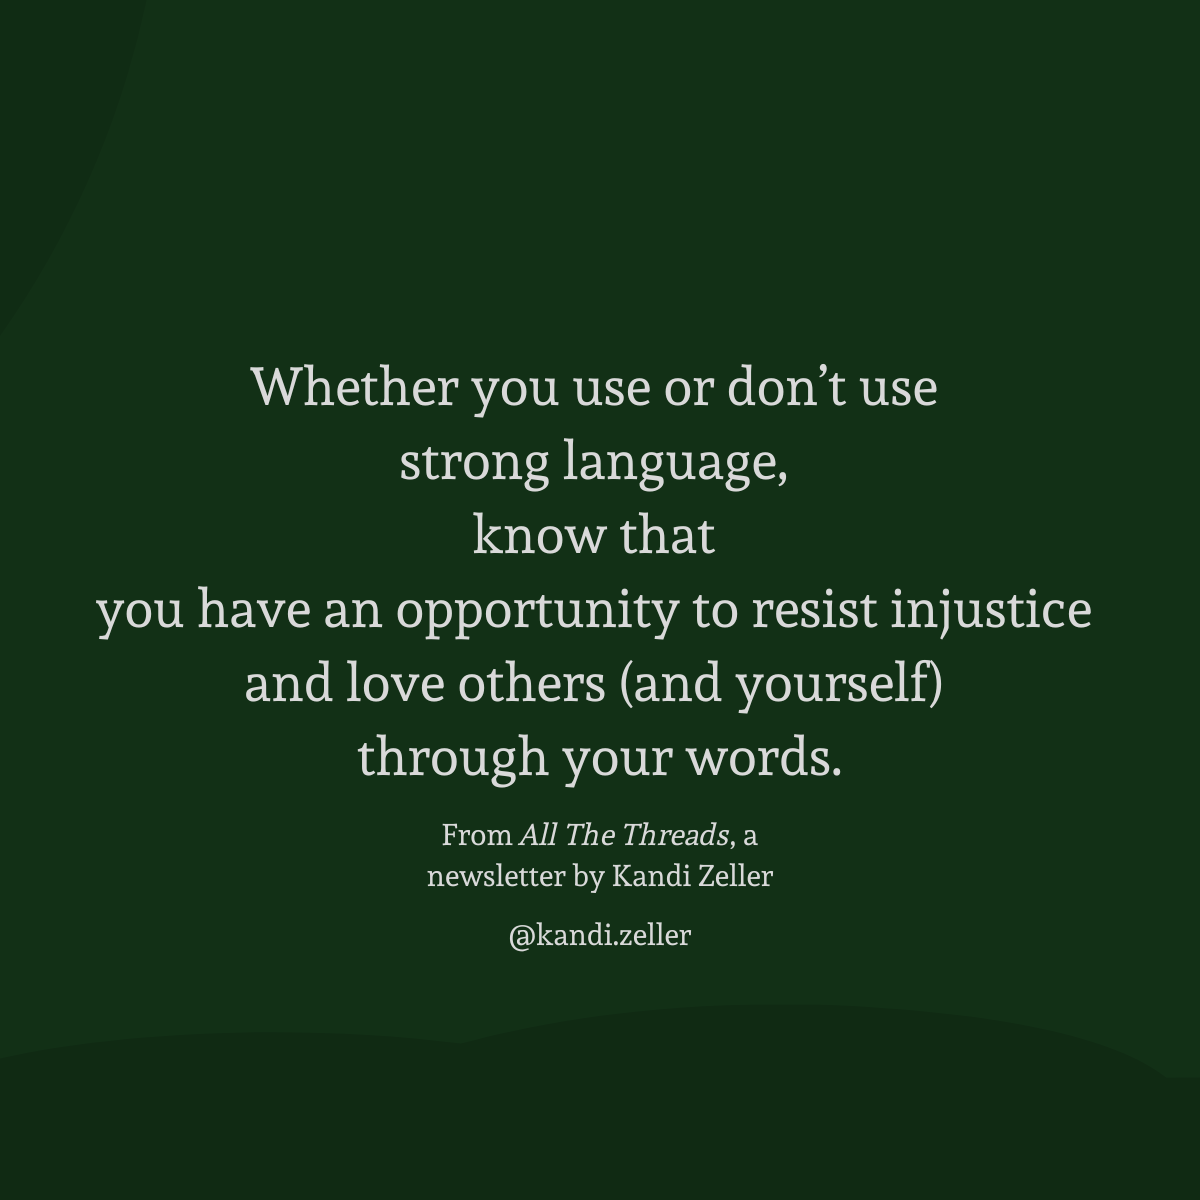 A dark green background with white lettering that reads, “Whether you use or don’t use strong language, know that you have an opportunity to resist injustice and love others (and yourself) through your words. From All The Threads, a newsletter by Kandi Zeller, @Kandi.Zeller”